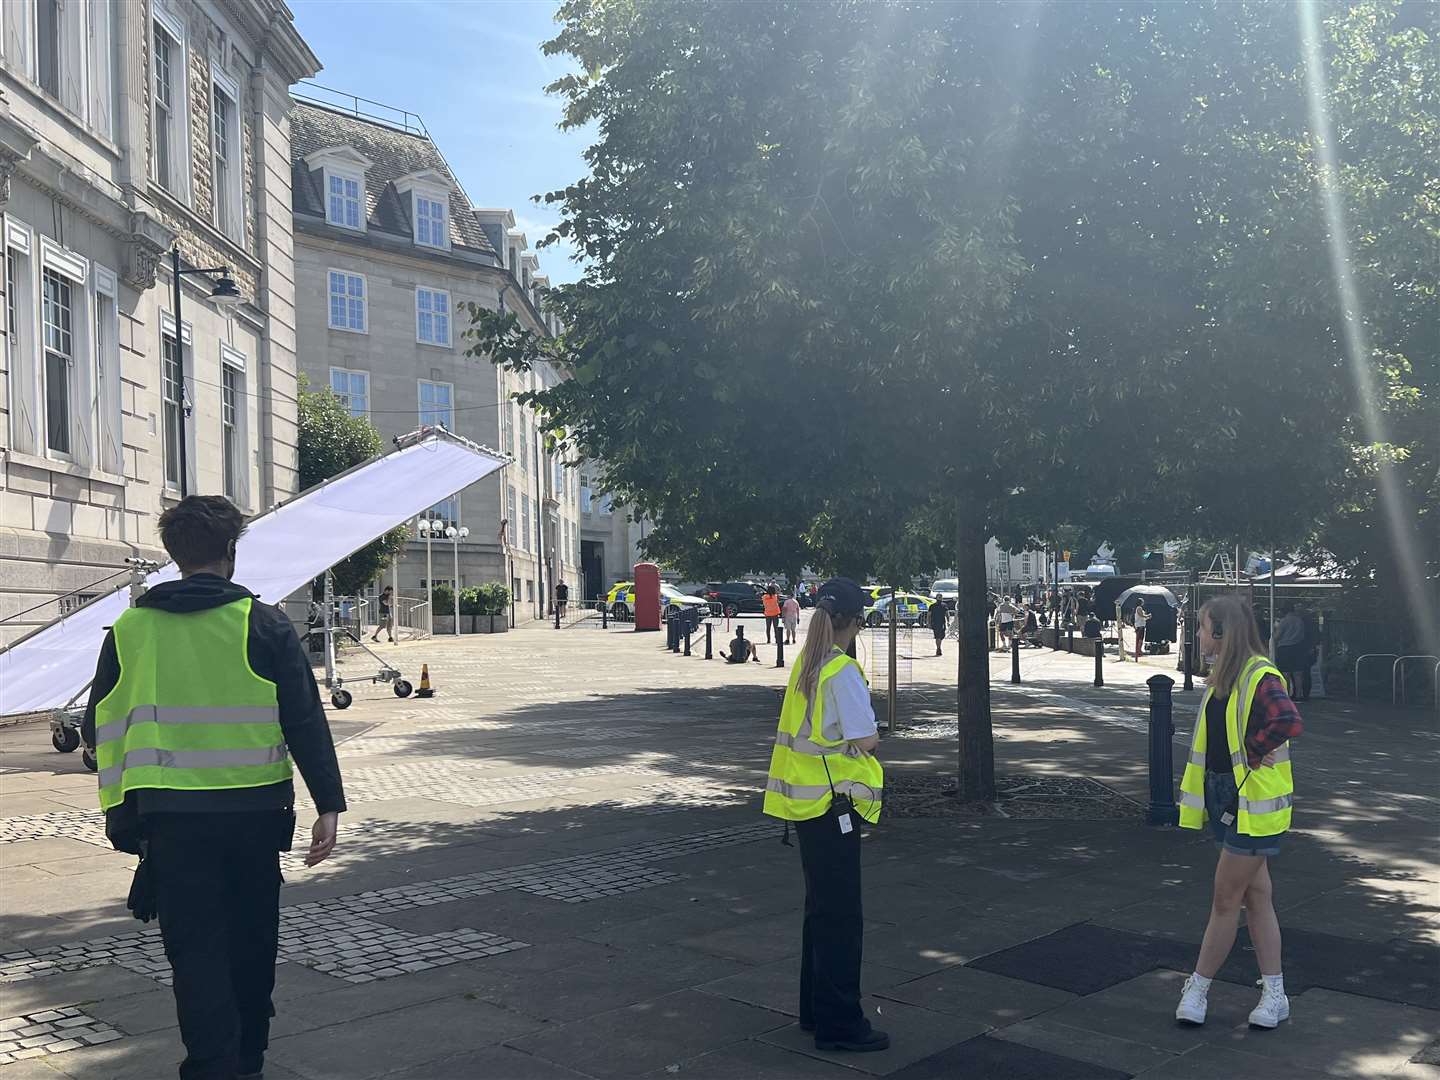 Film crews were spotted outside County Hall in Maidstone